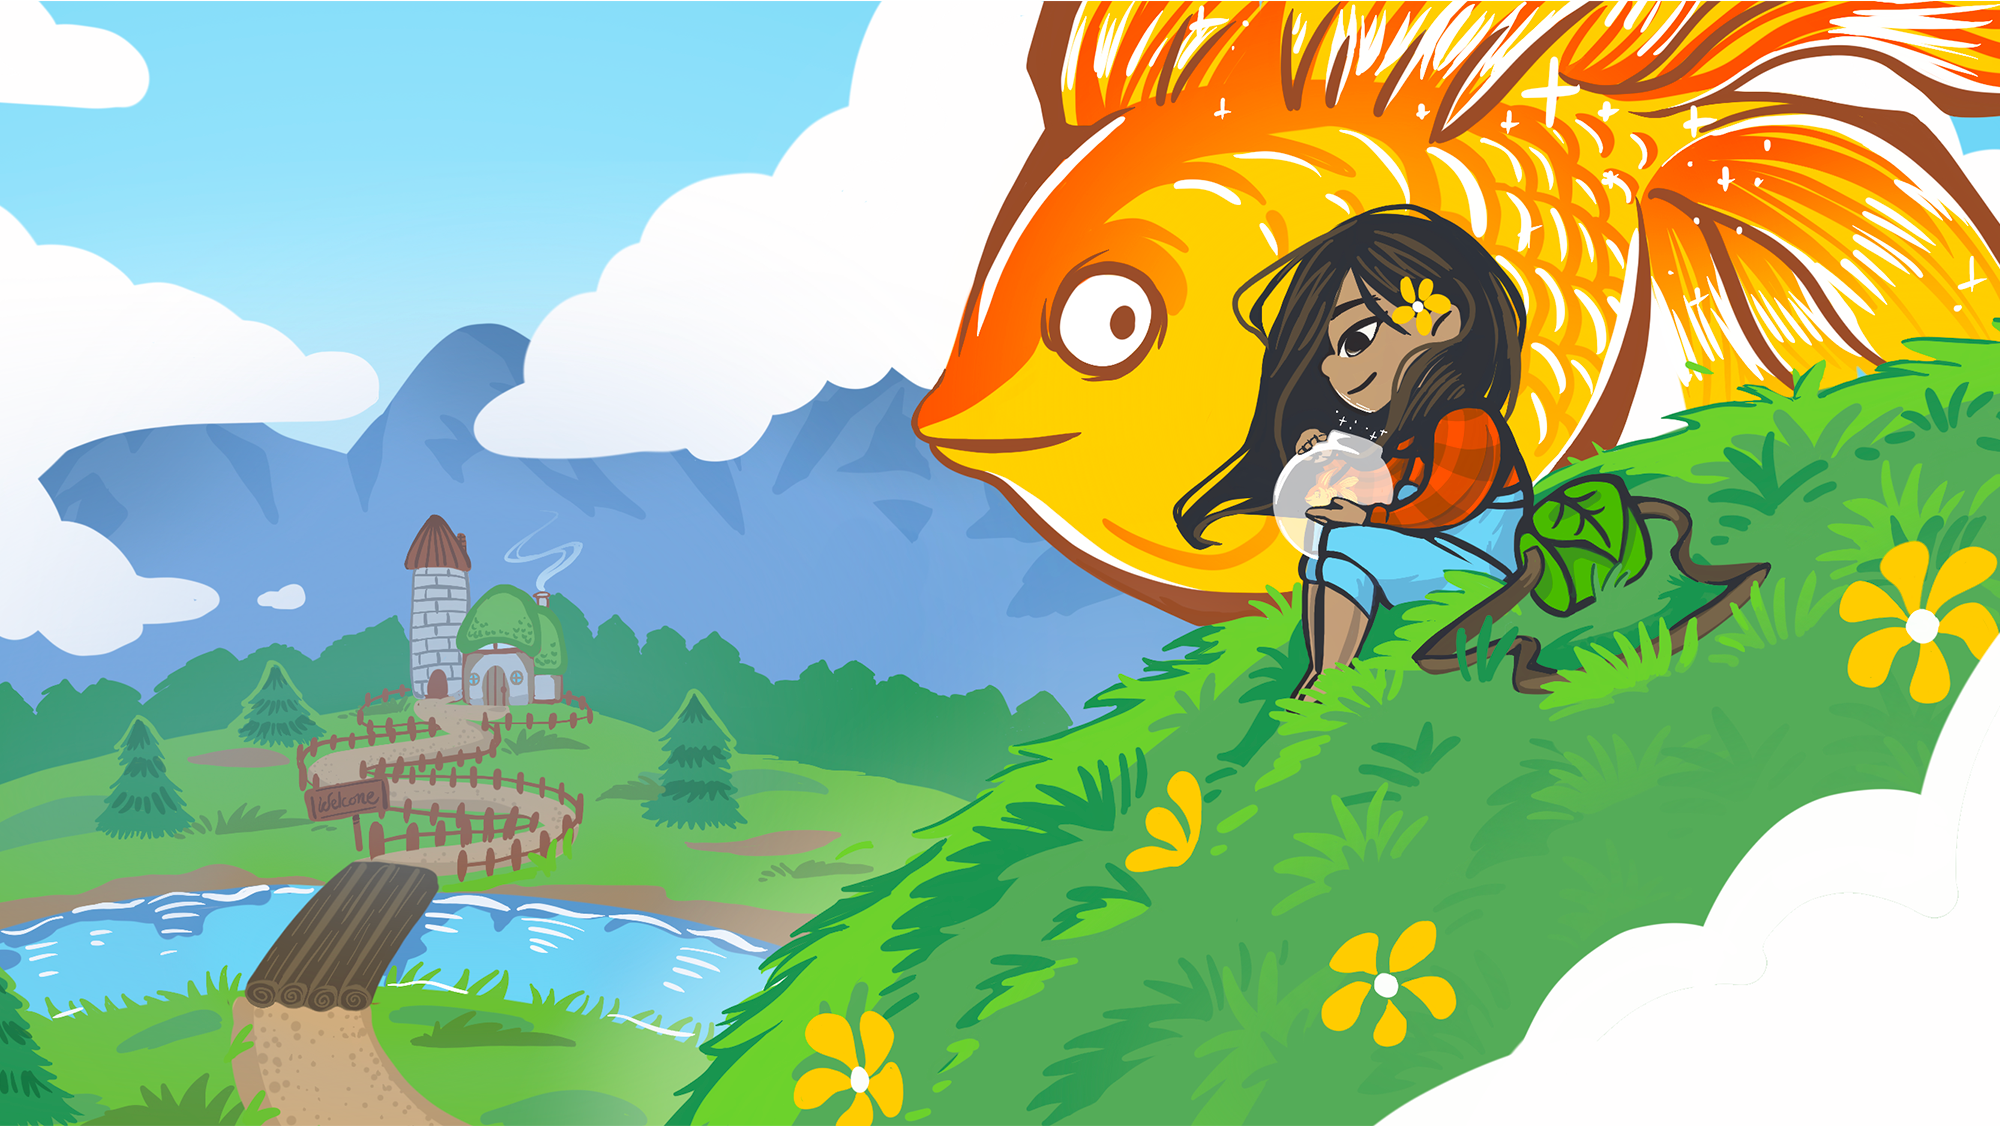 A girl on a hill smiles as she stairs at a goldfish